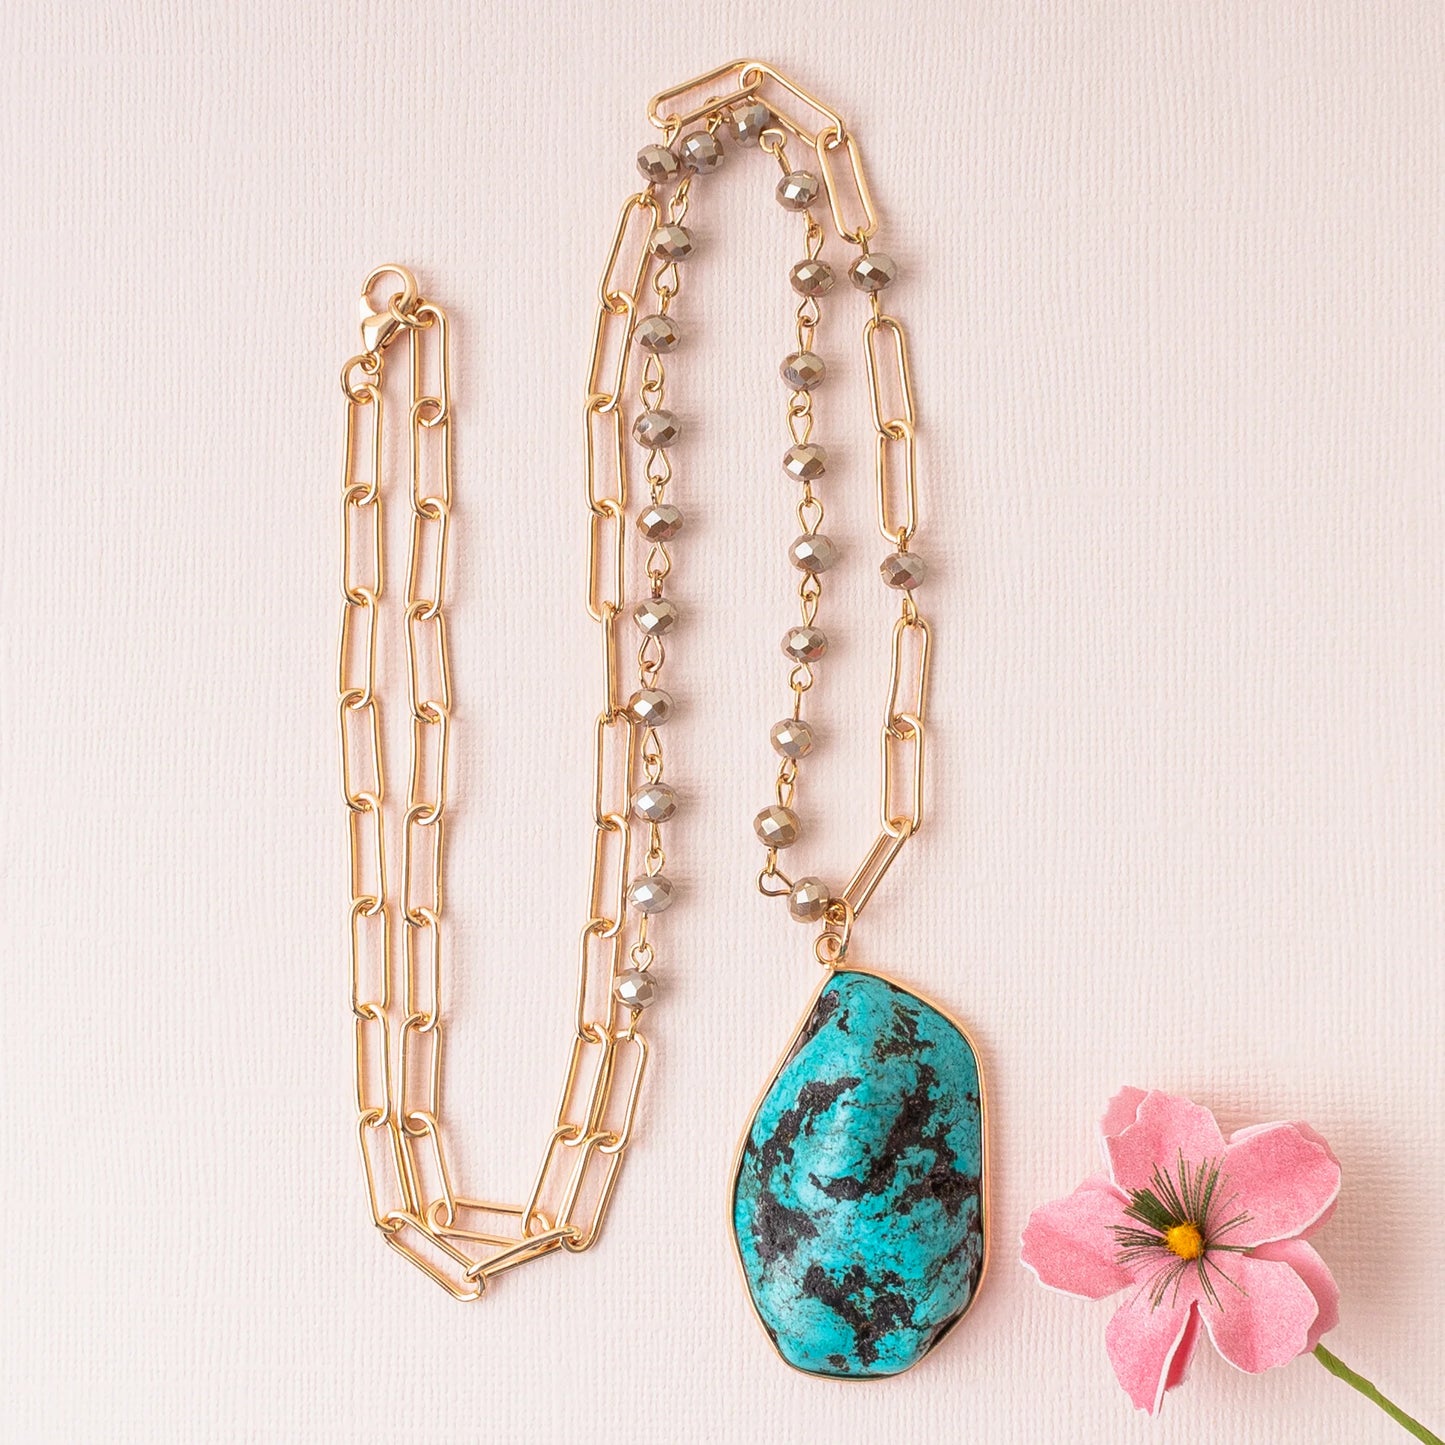 Gold Chain & Turquoise Pendant Necklace